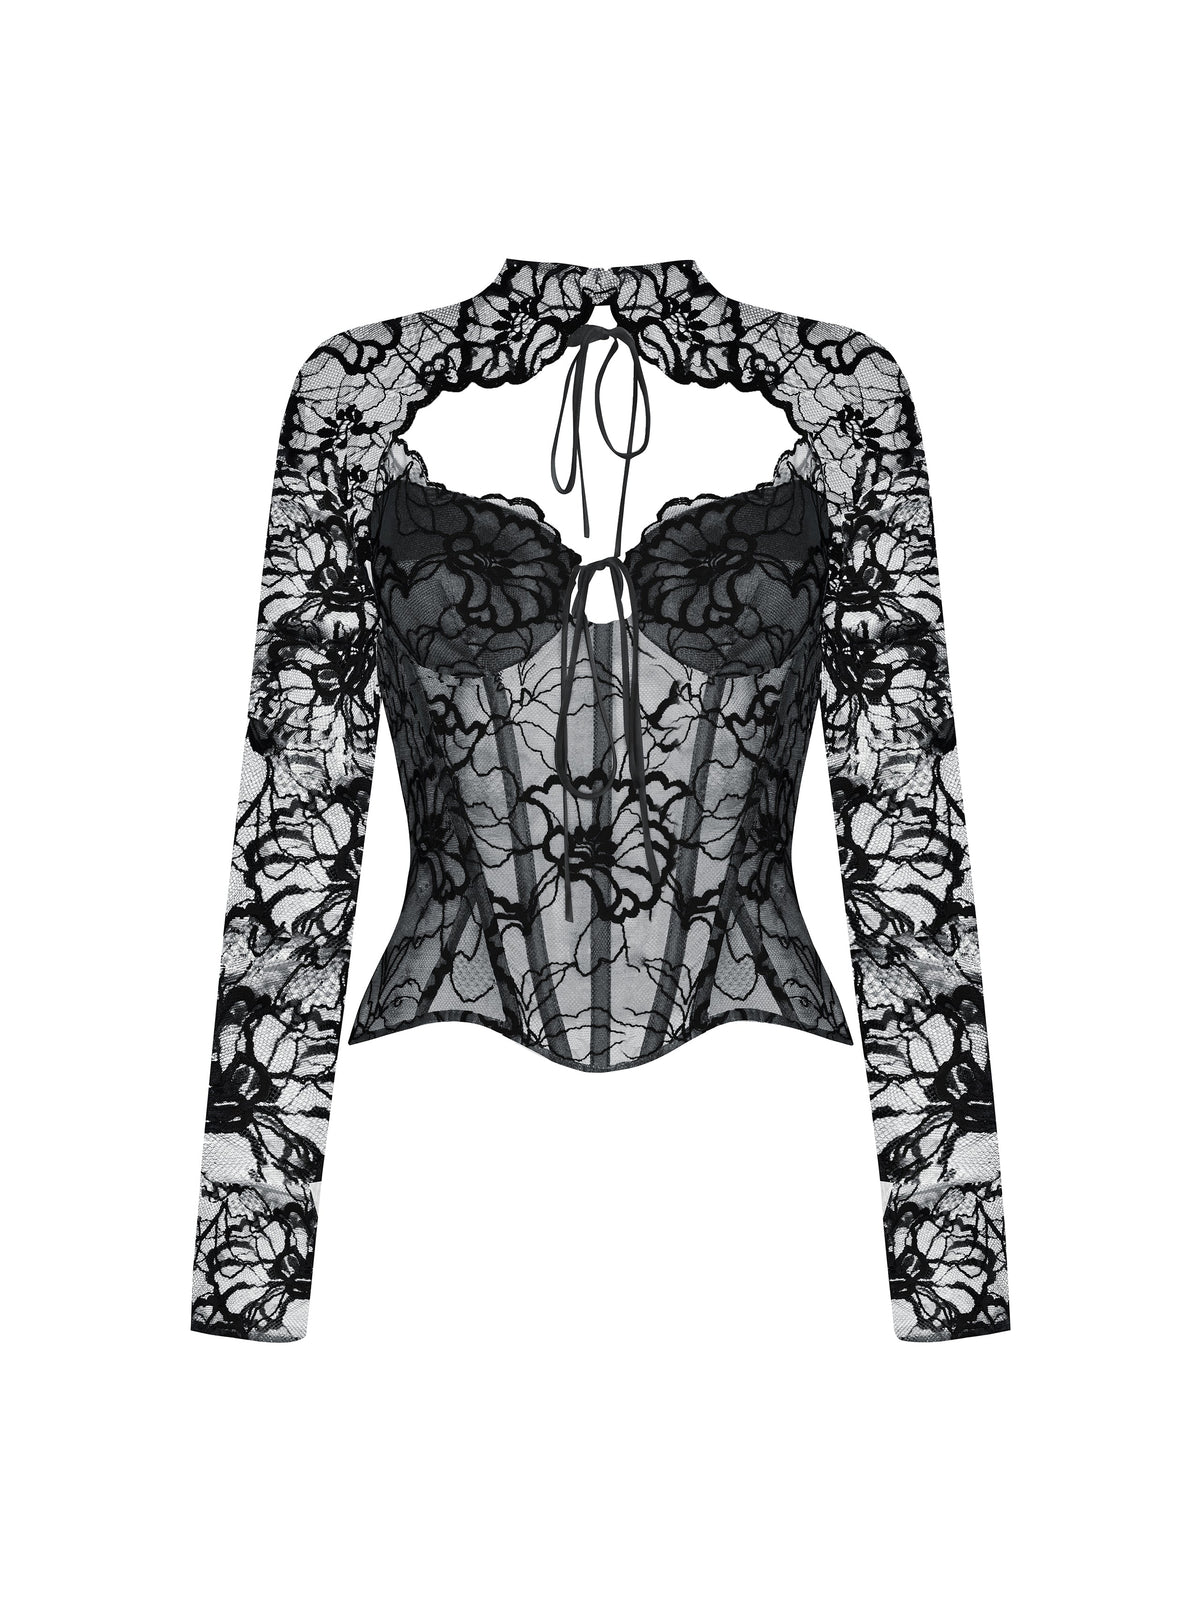 Lace long-sleeve bustier corset top Black RC23S060A001 - buy at the online  boutique RozieCorsets